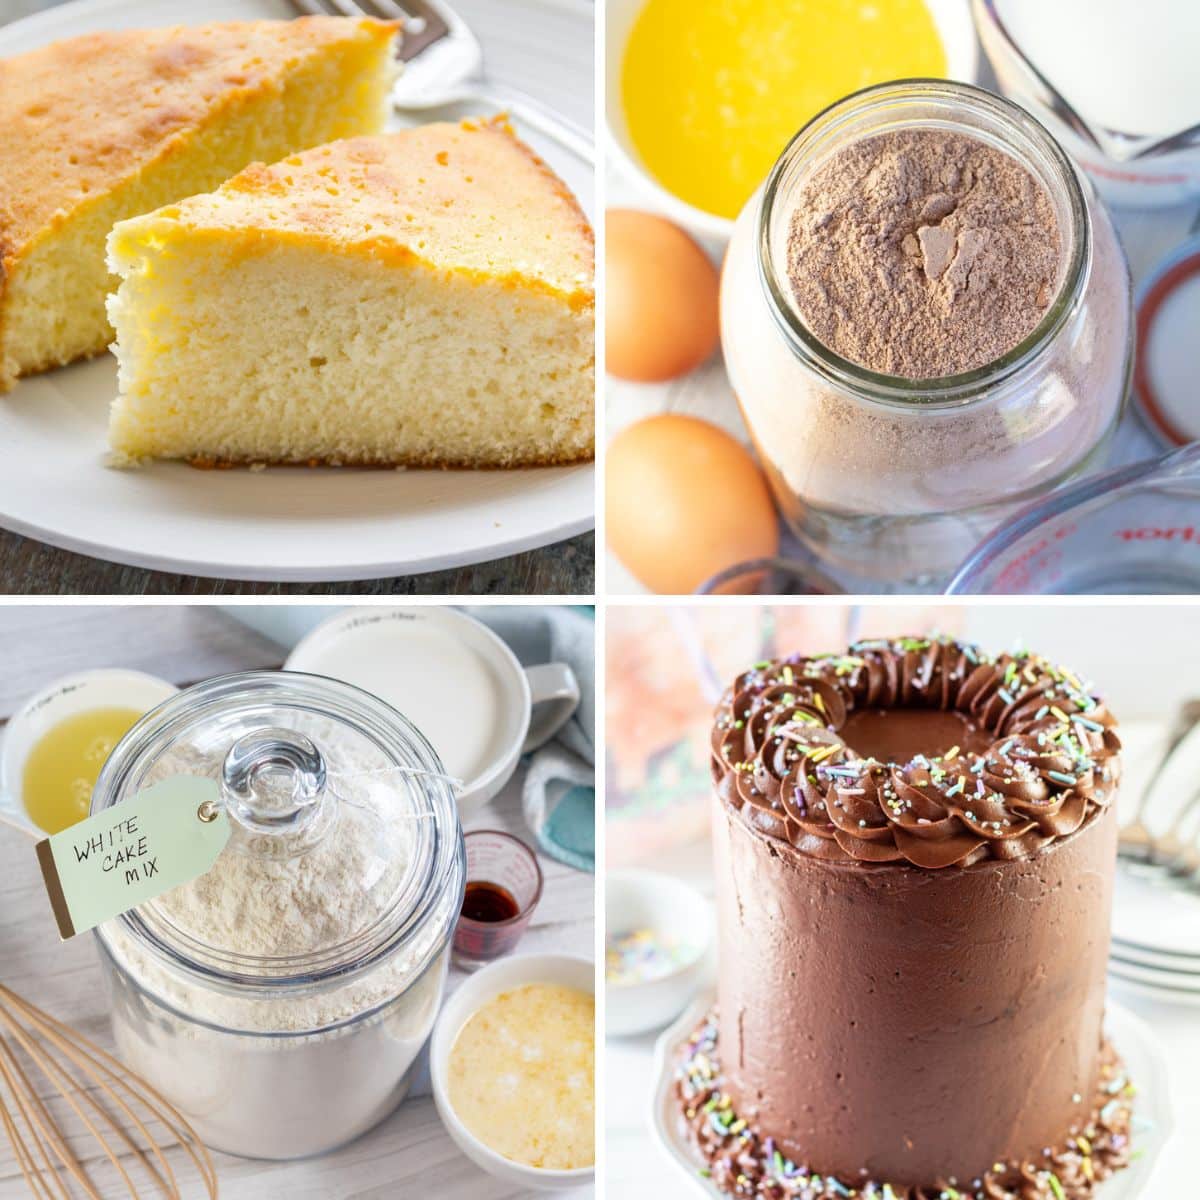 How To Make Homemade Cake Mix: A Step-By-Step Guide